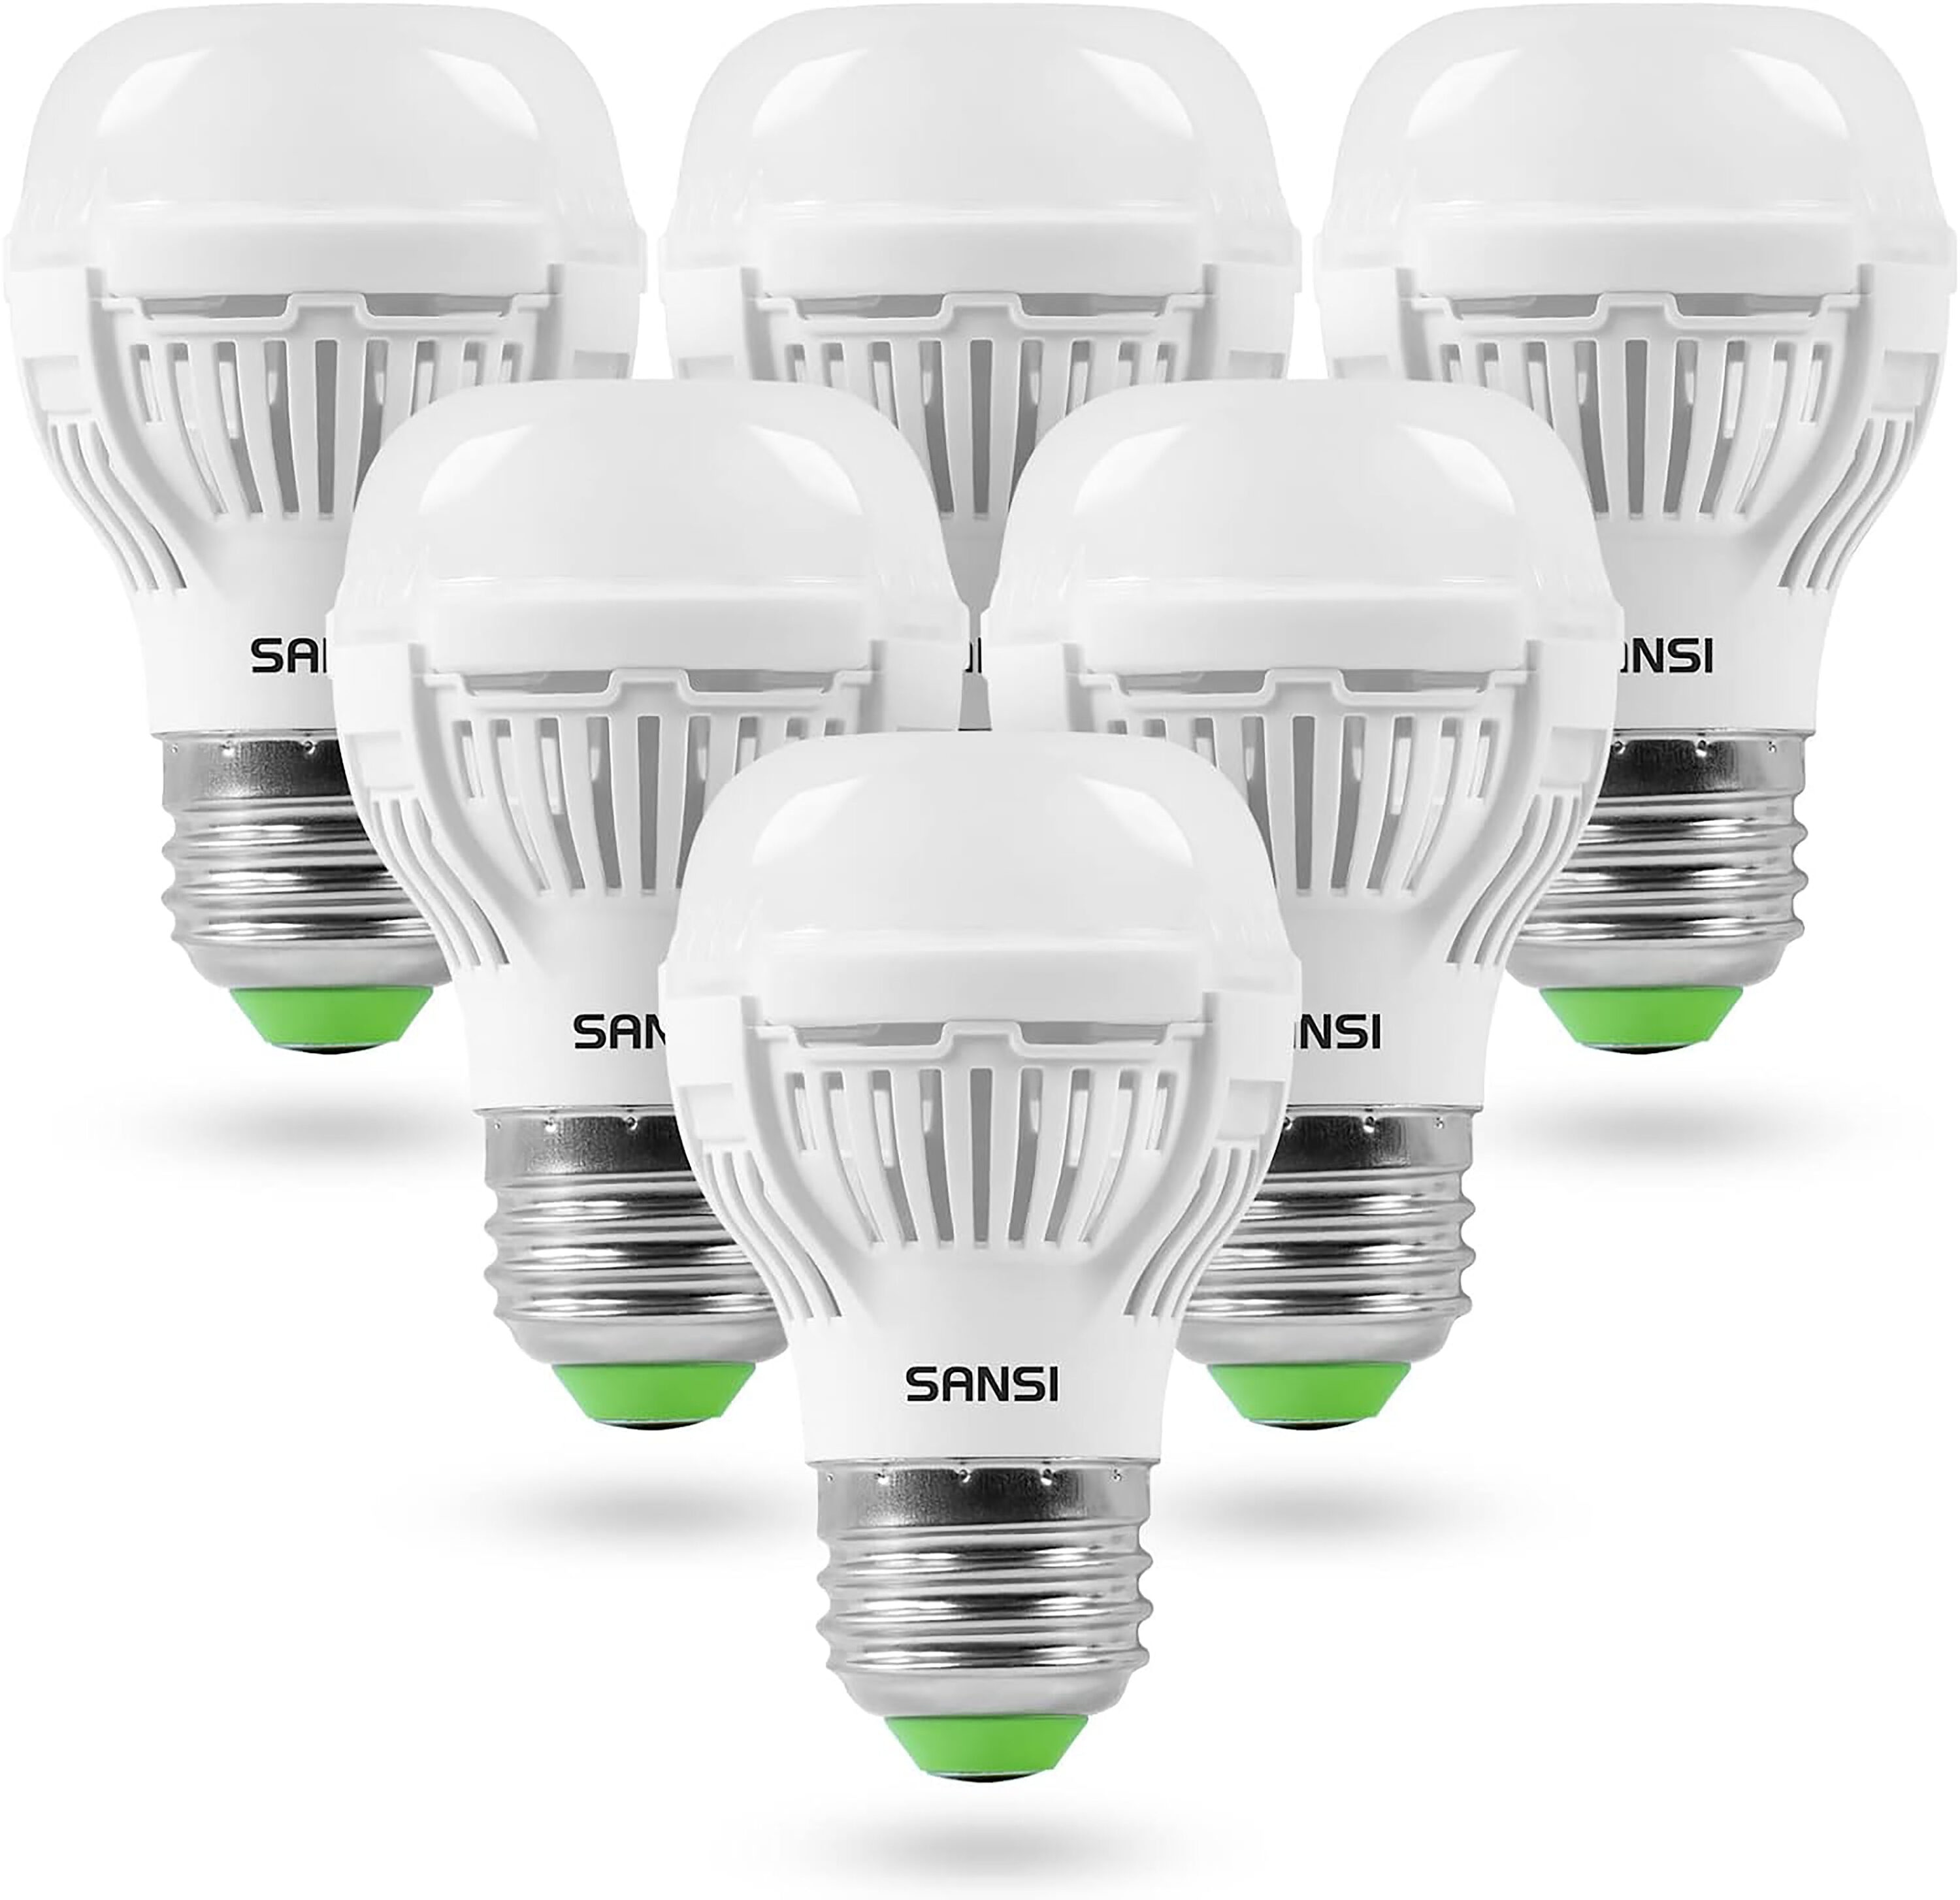 SANSI 60W Equivalent LED Light Bulbs, 6 Pack 900 Lumens LED Bulb, 3000K Soft White 9W Non-Dimmable, E26, A15 Efficient, Safe Energy Saving for Home Lighting in the General Purpose LED